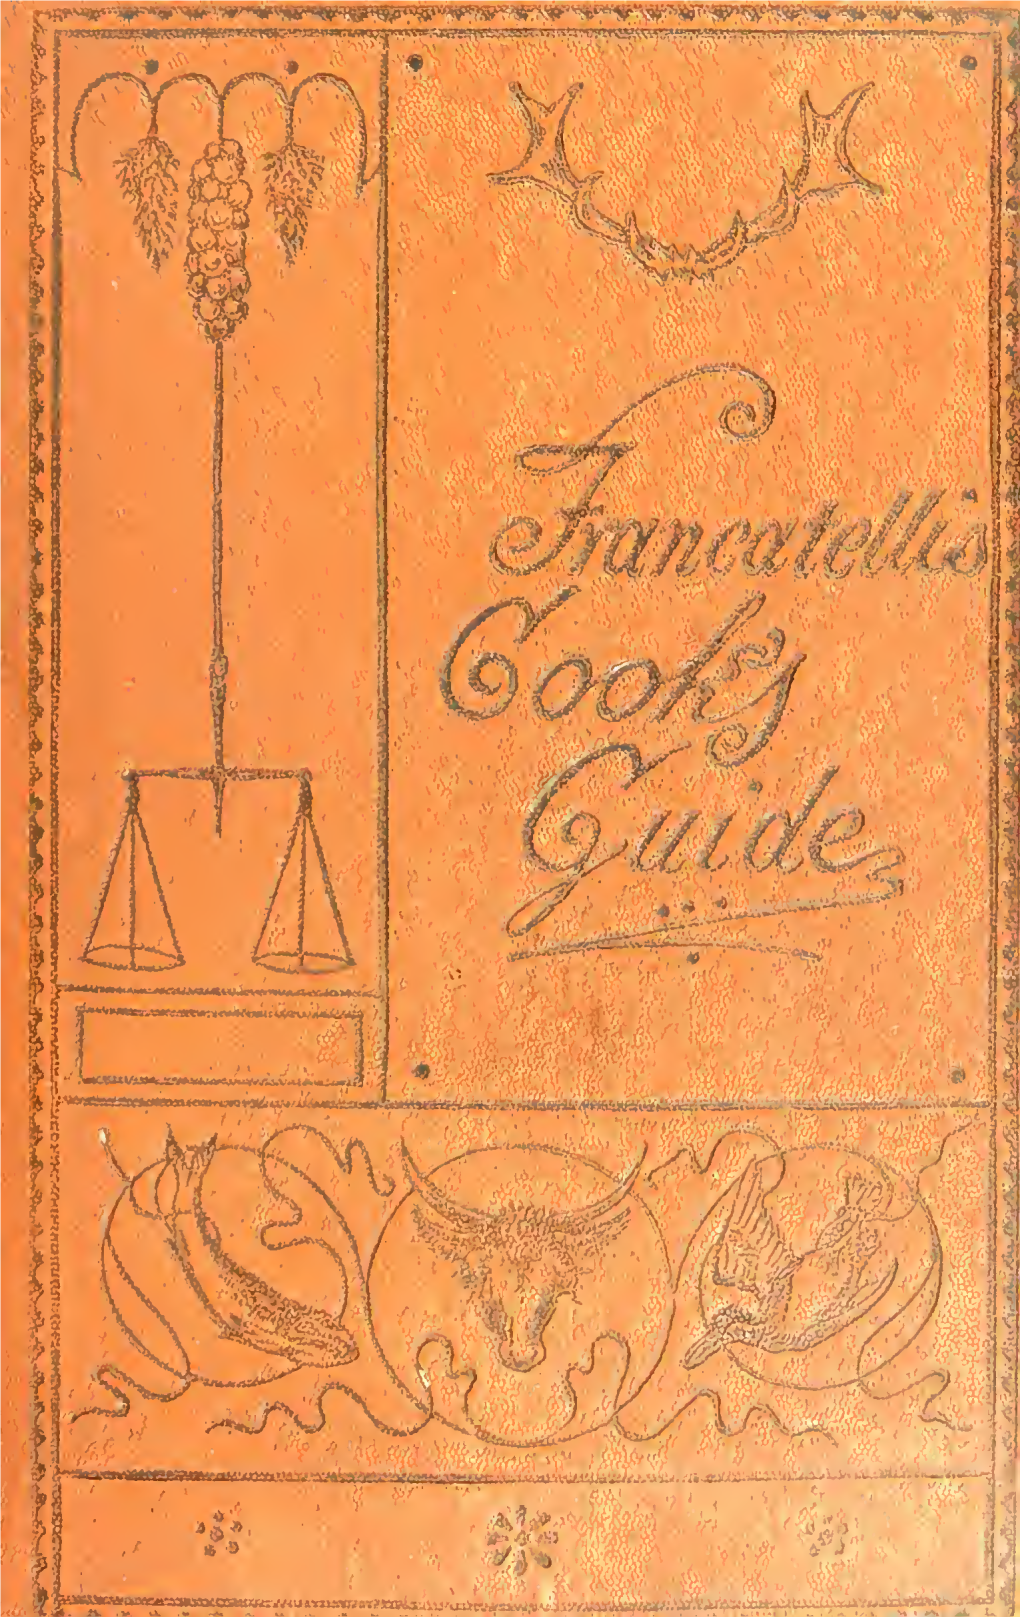 The Cook's Guide and Housekeeper's & Butler's